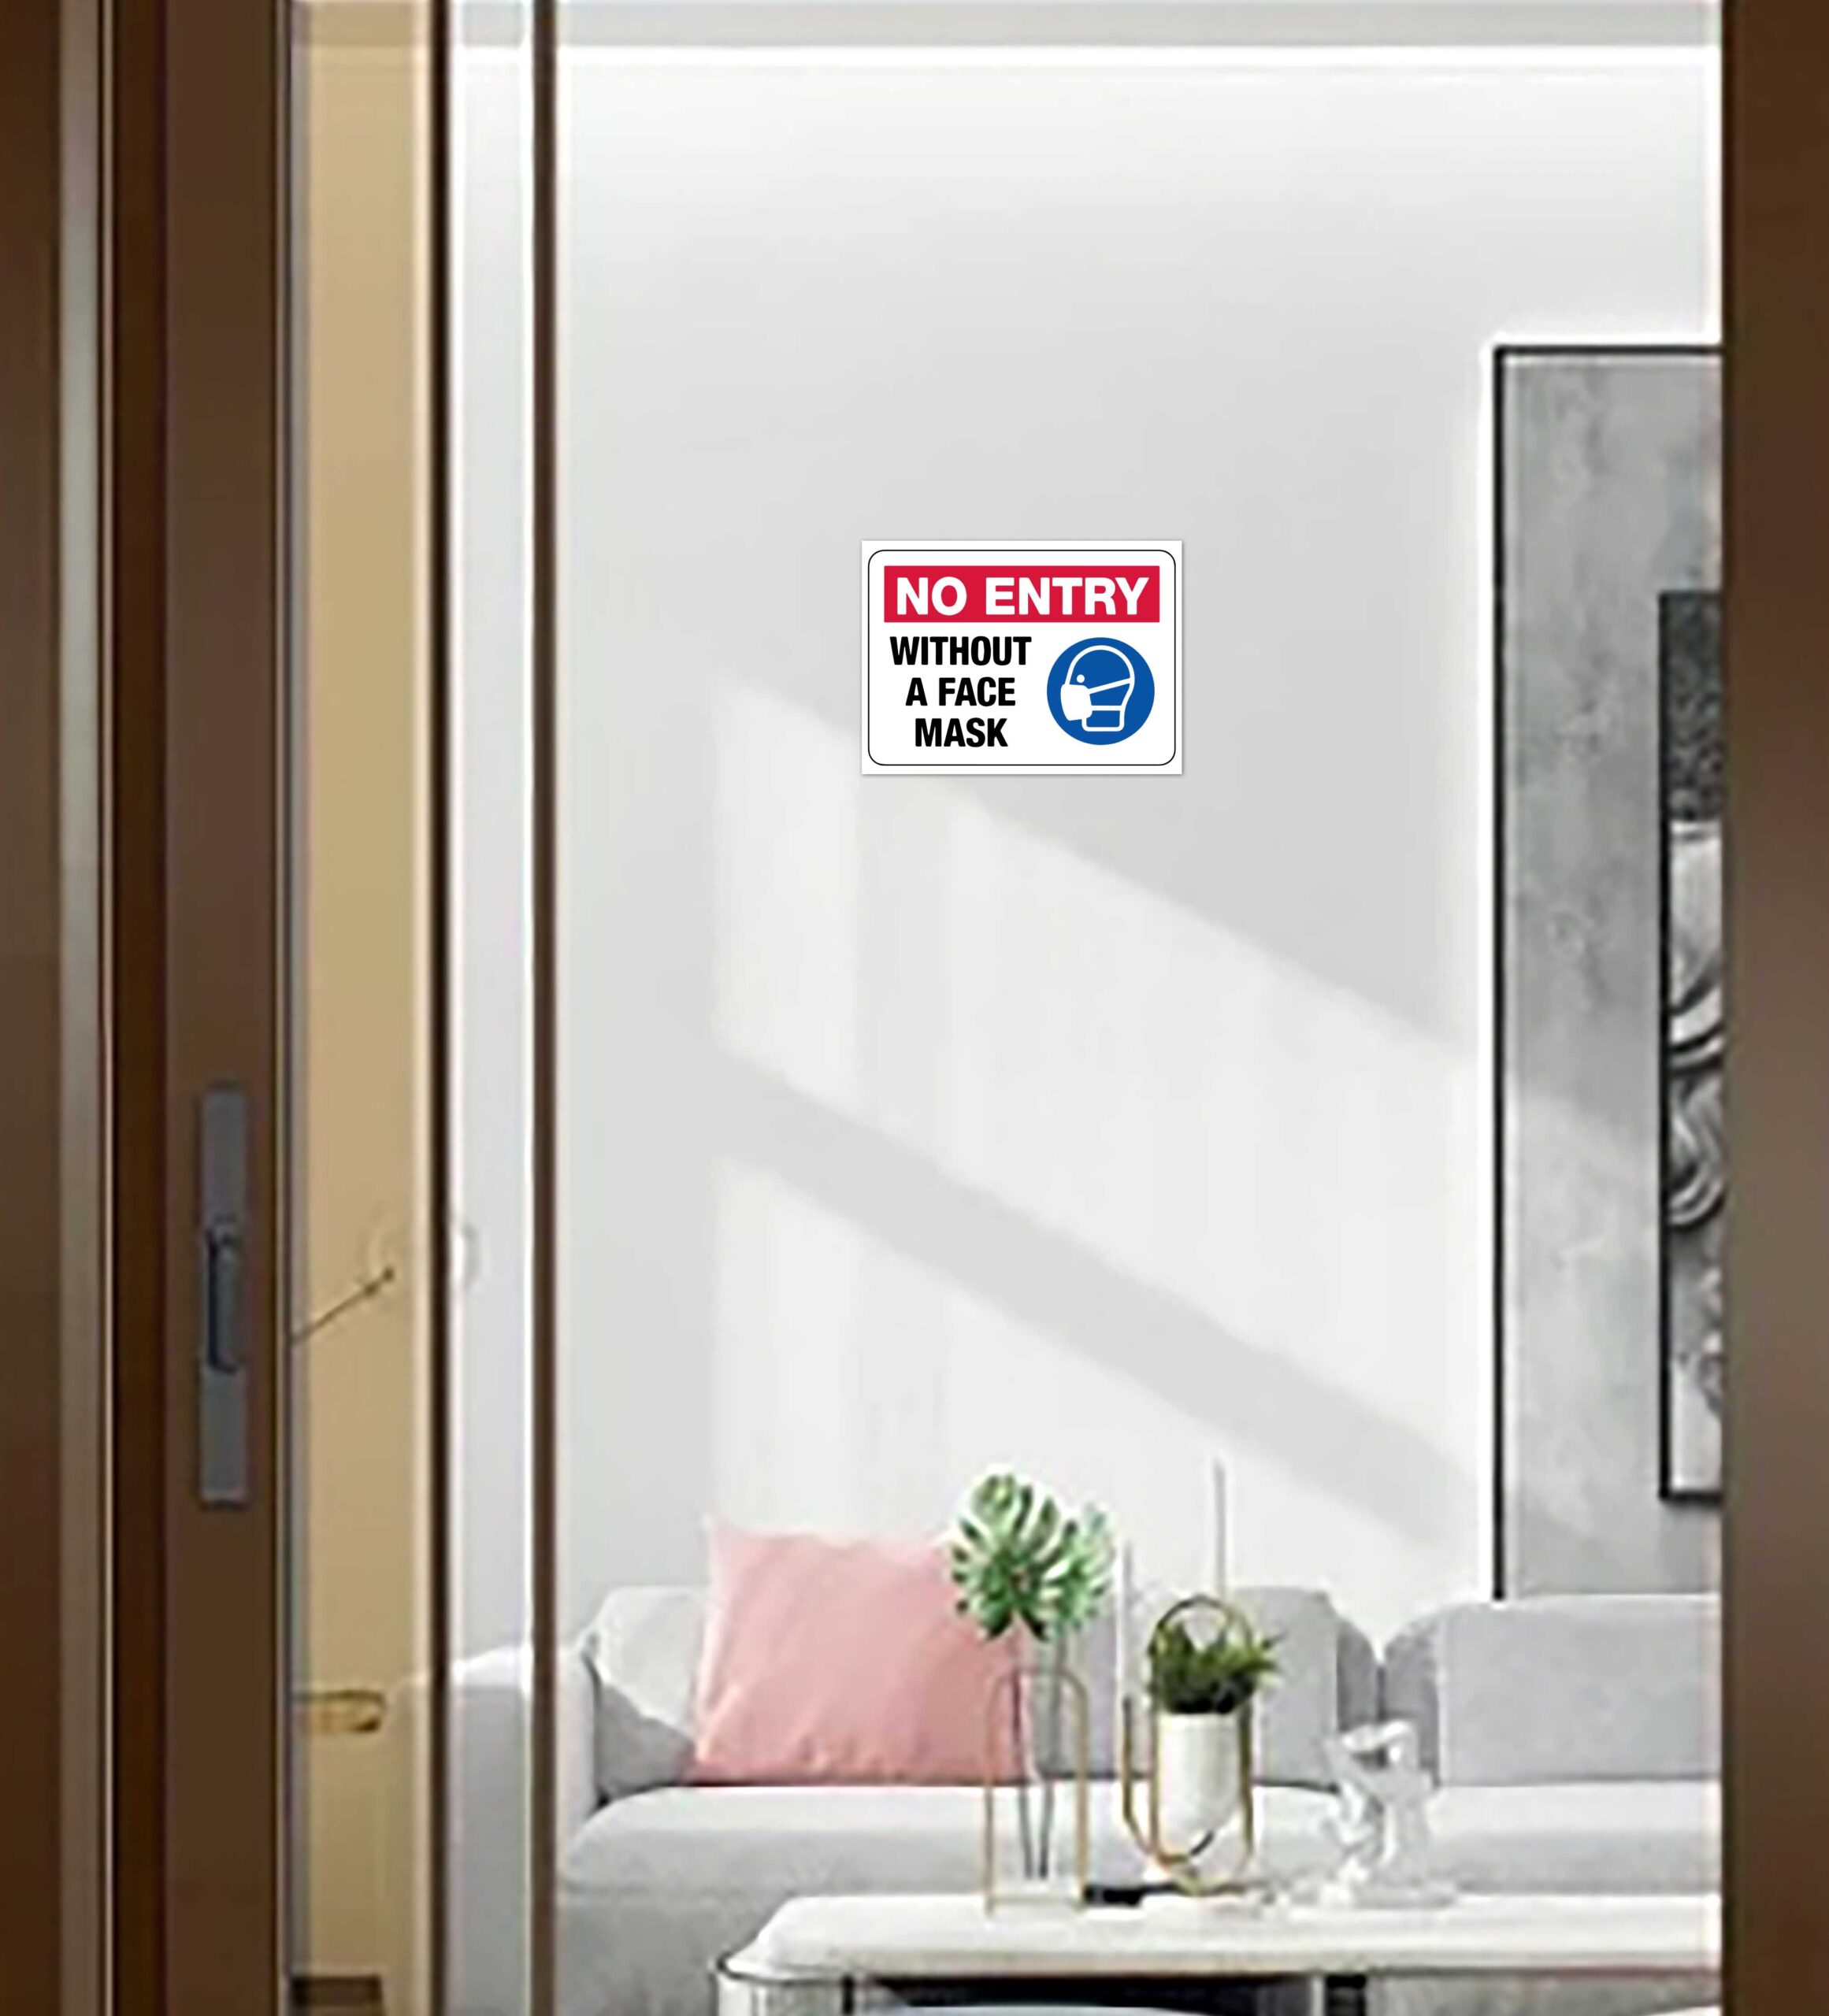 Warning “No Entry without a Face Mask” Sun Sign Board – 10 in x 7 in